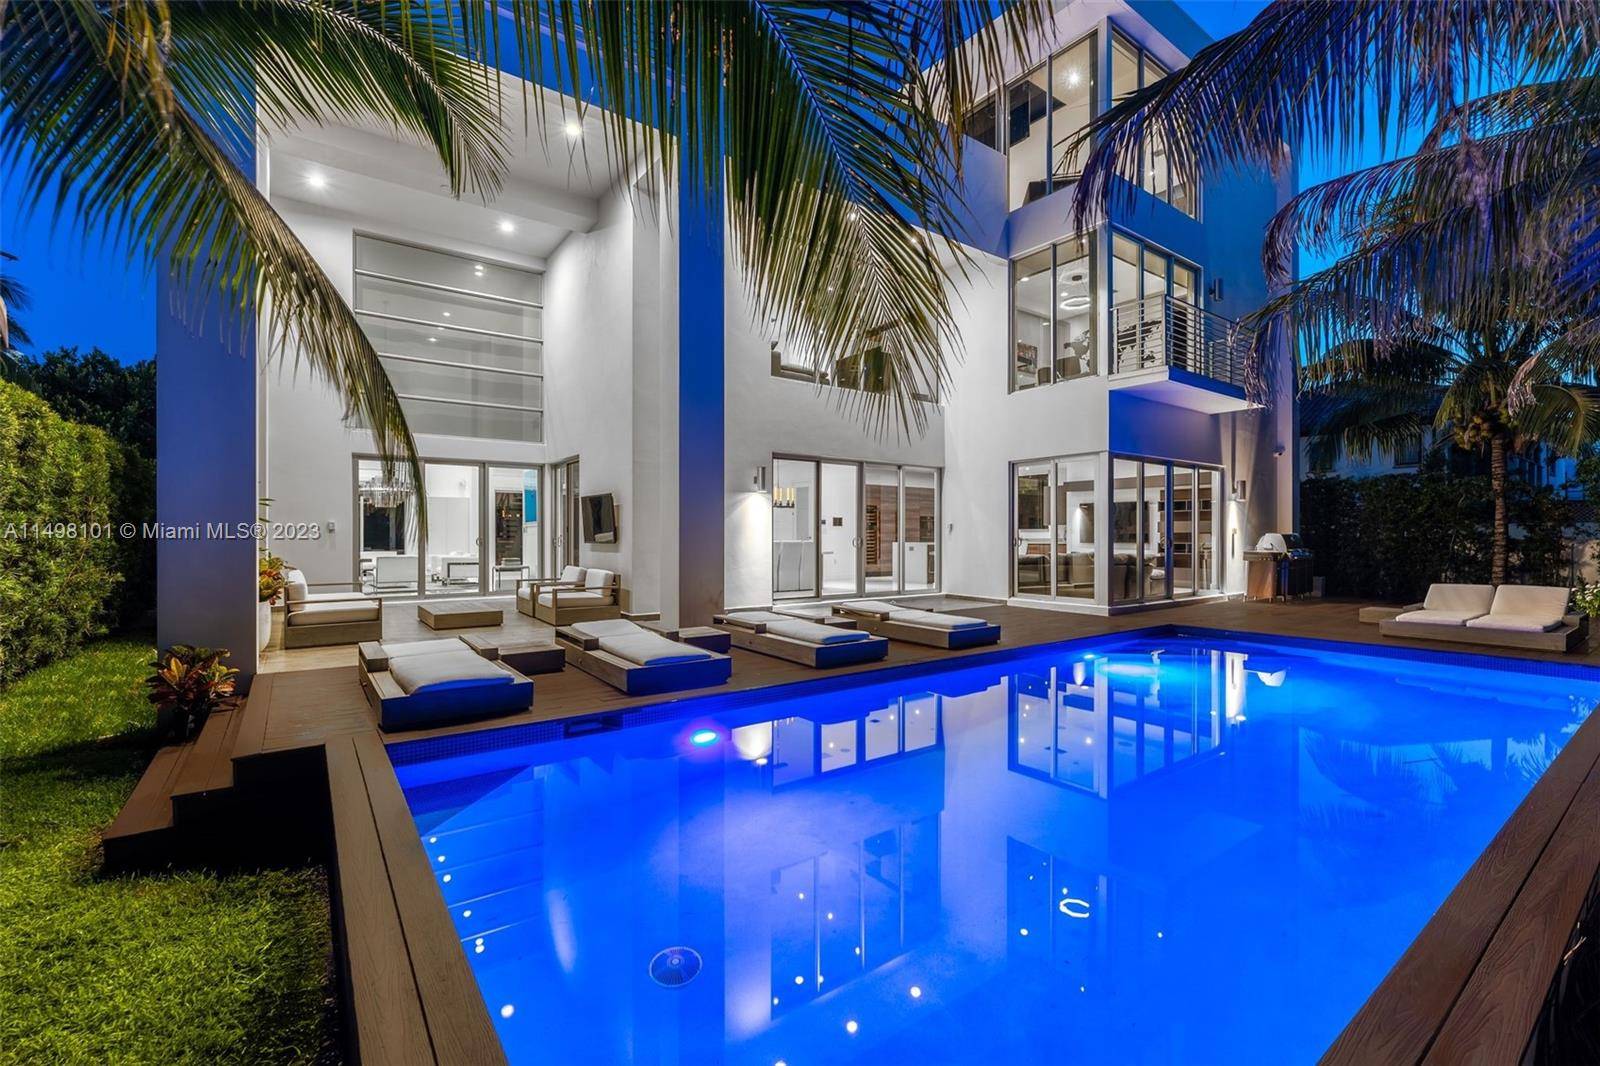 Welcome to this sleek three story smart home, just a block from the ocean.